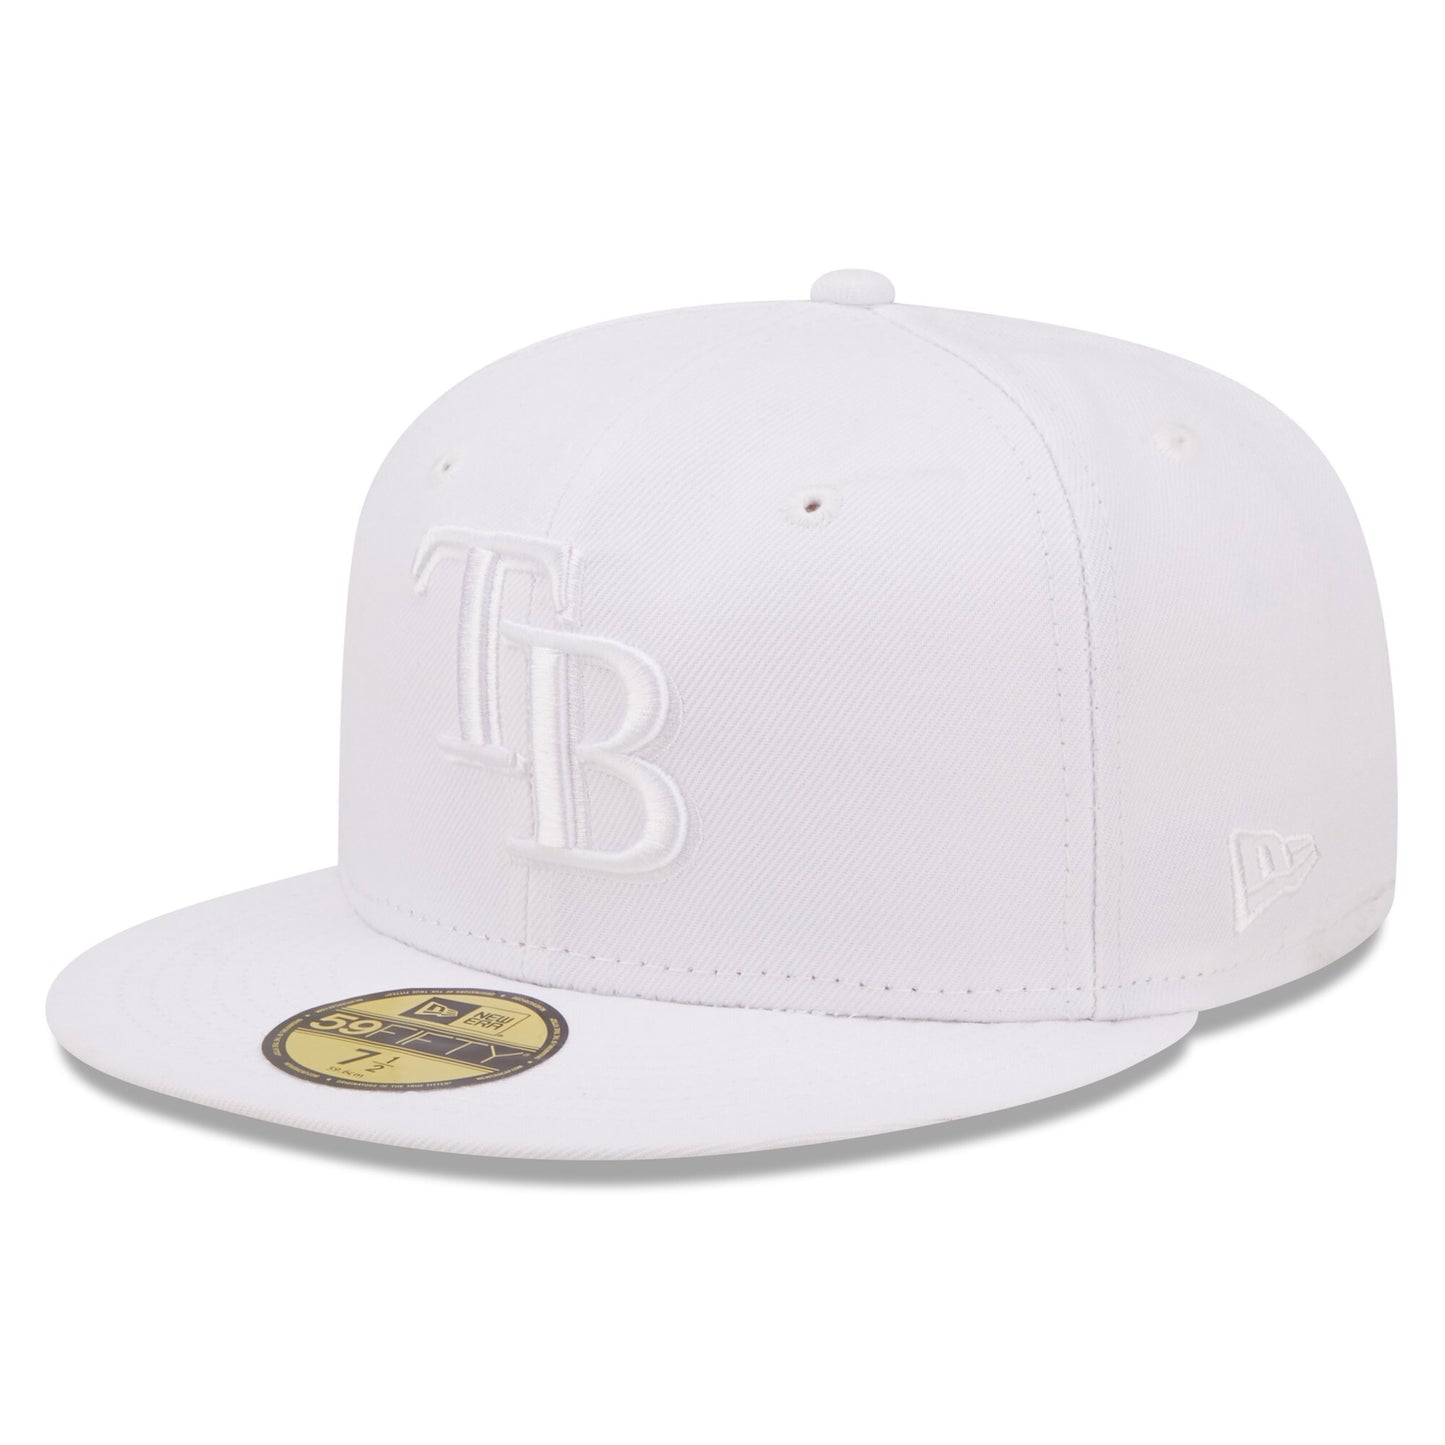 Tampa Bay Rays New Era White on White 59FIFTY Fitted Hat